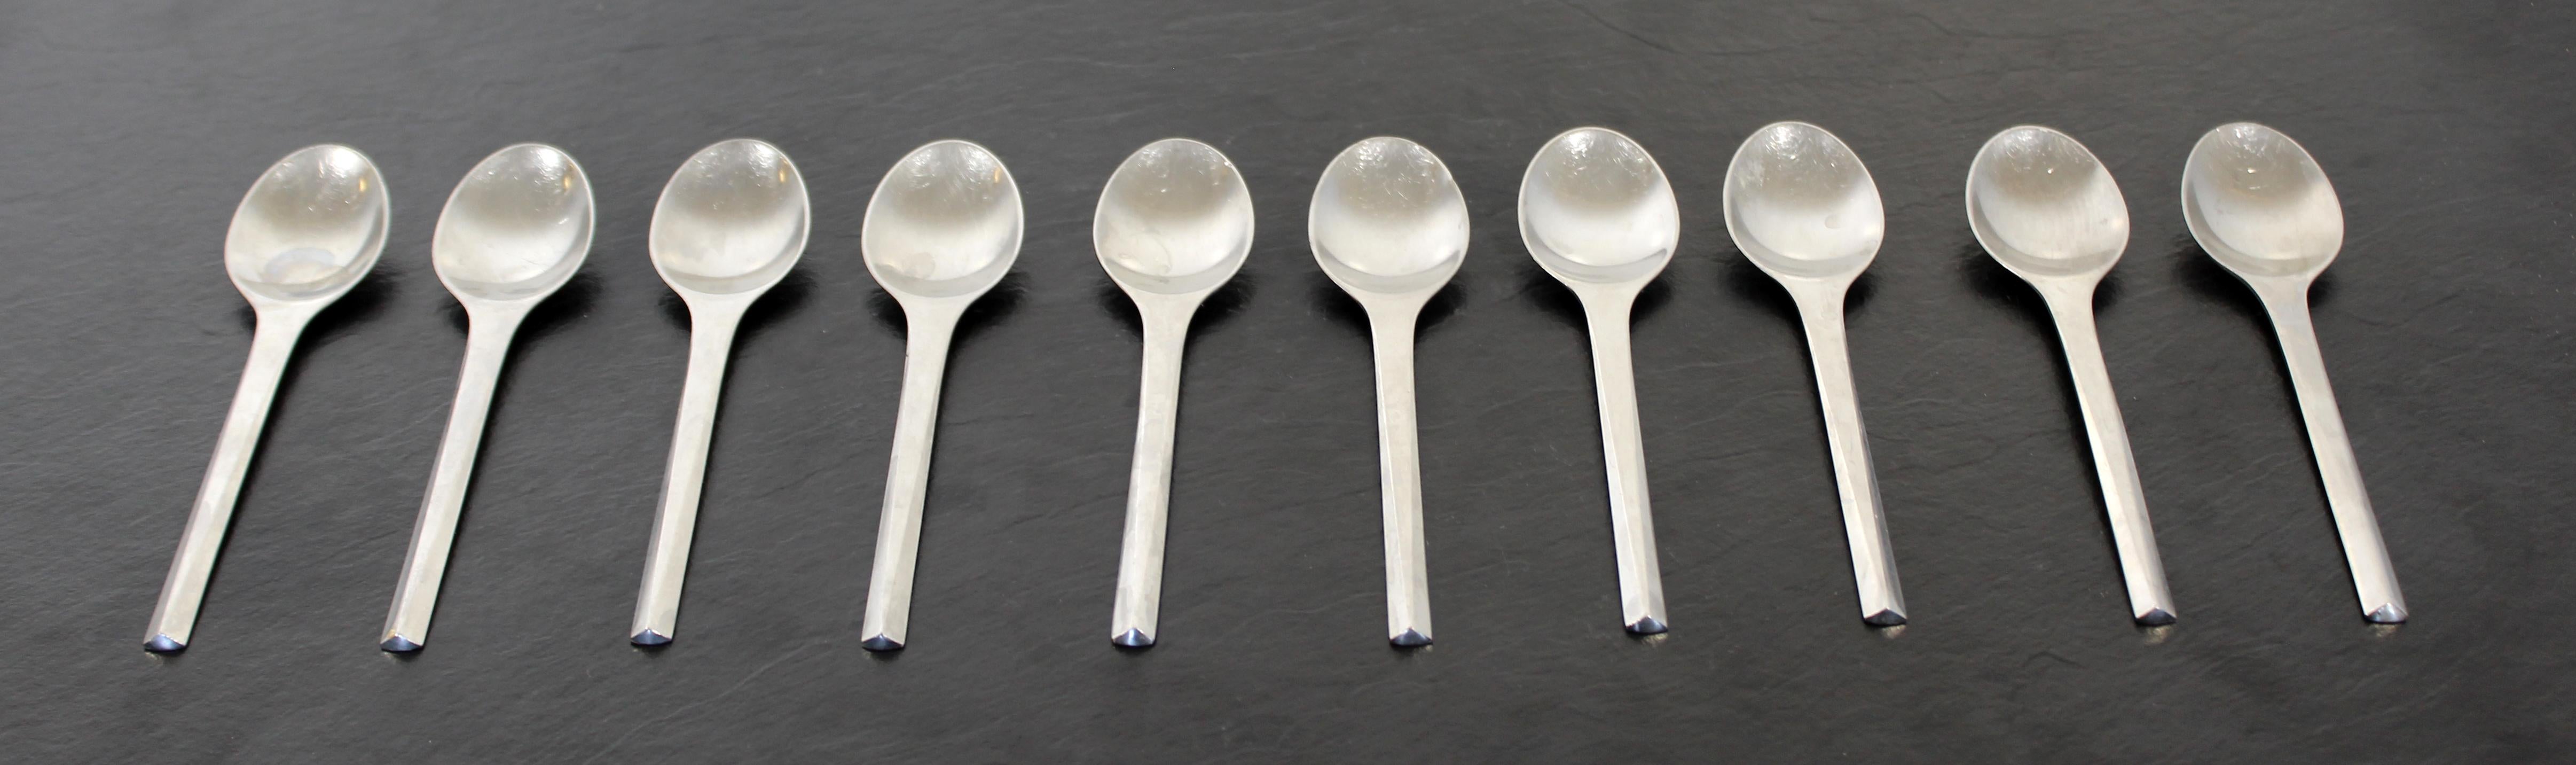 For your consideration is a set of ten, matte stainless steel dessert spoons from the Prism cutlery series, by Georg Jensen, circa the 1960s. All pieces stamped 